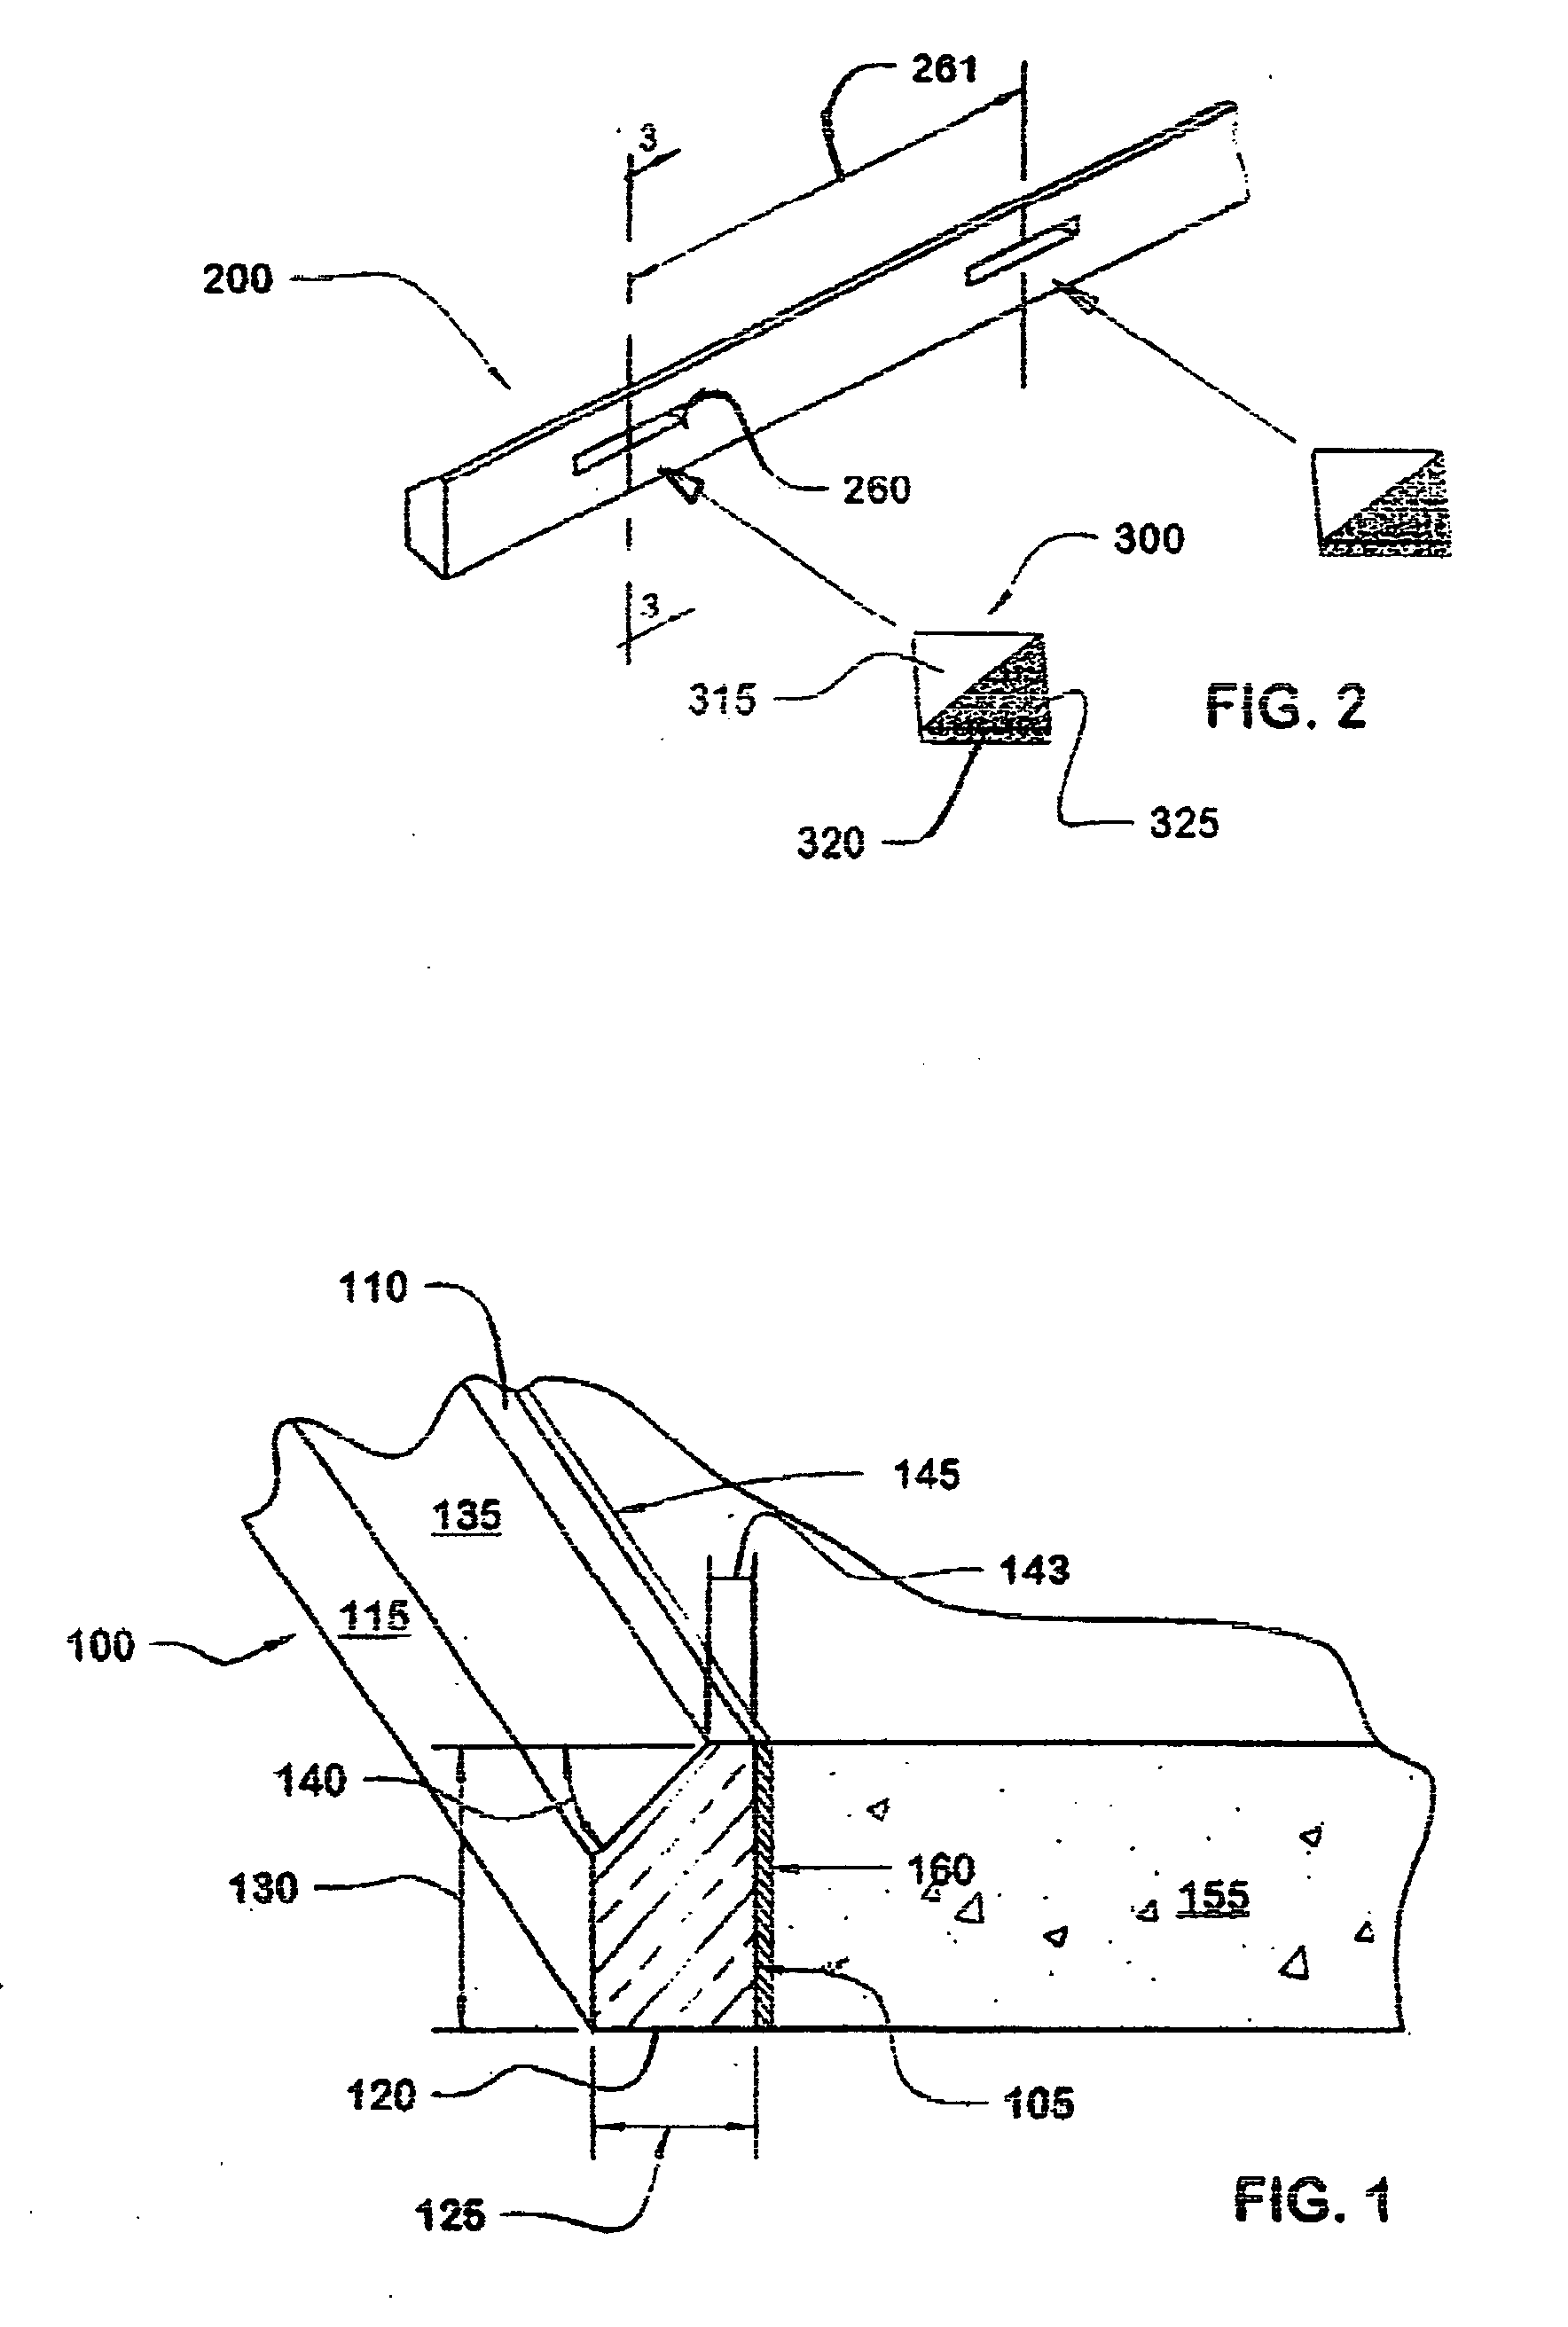 Apparatus for and method of forming concrete and transferring loads between concrete slabs